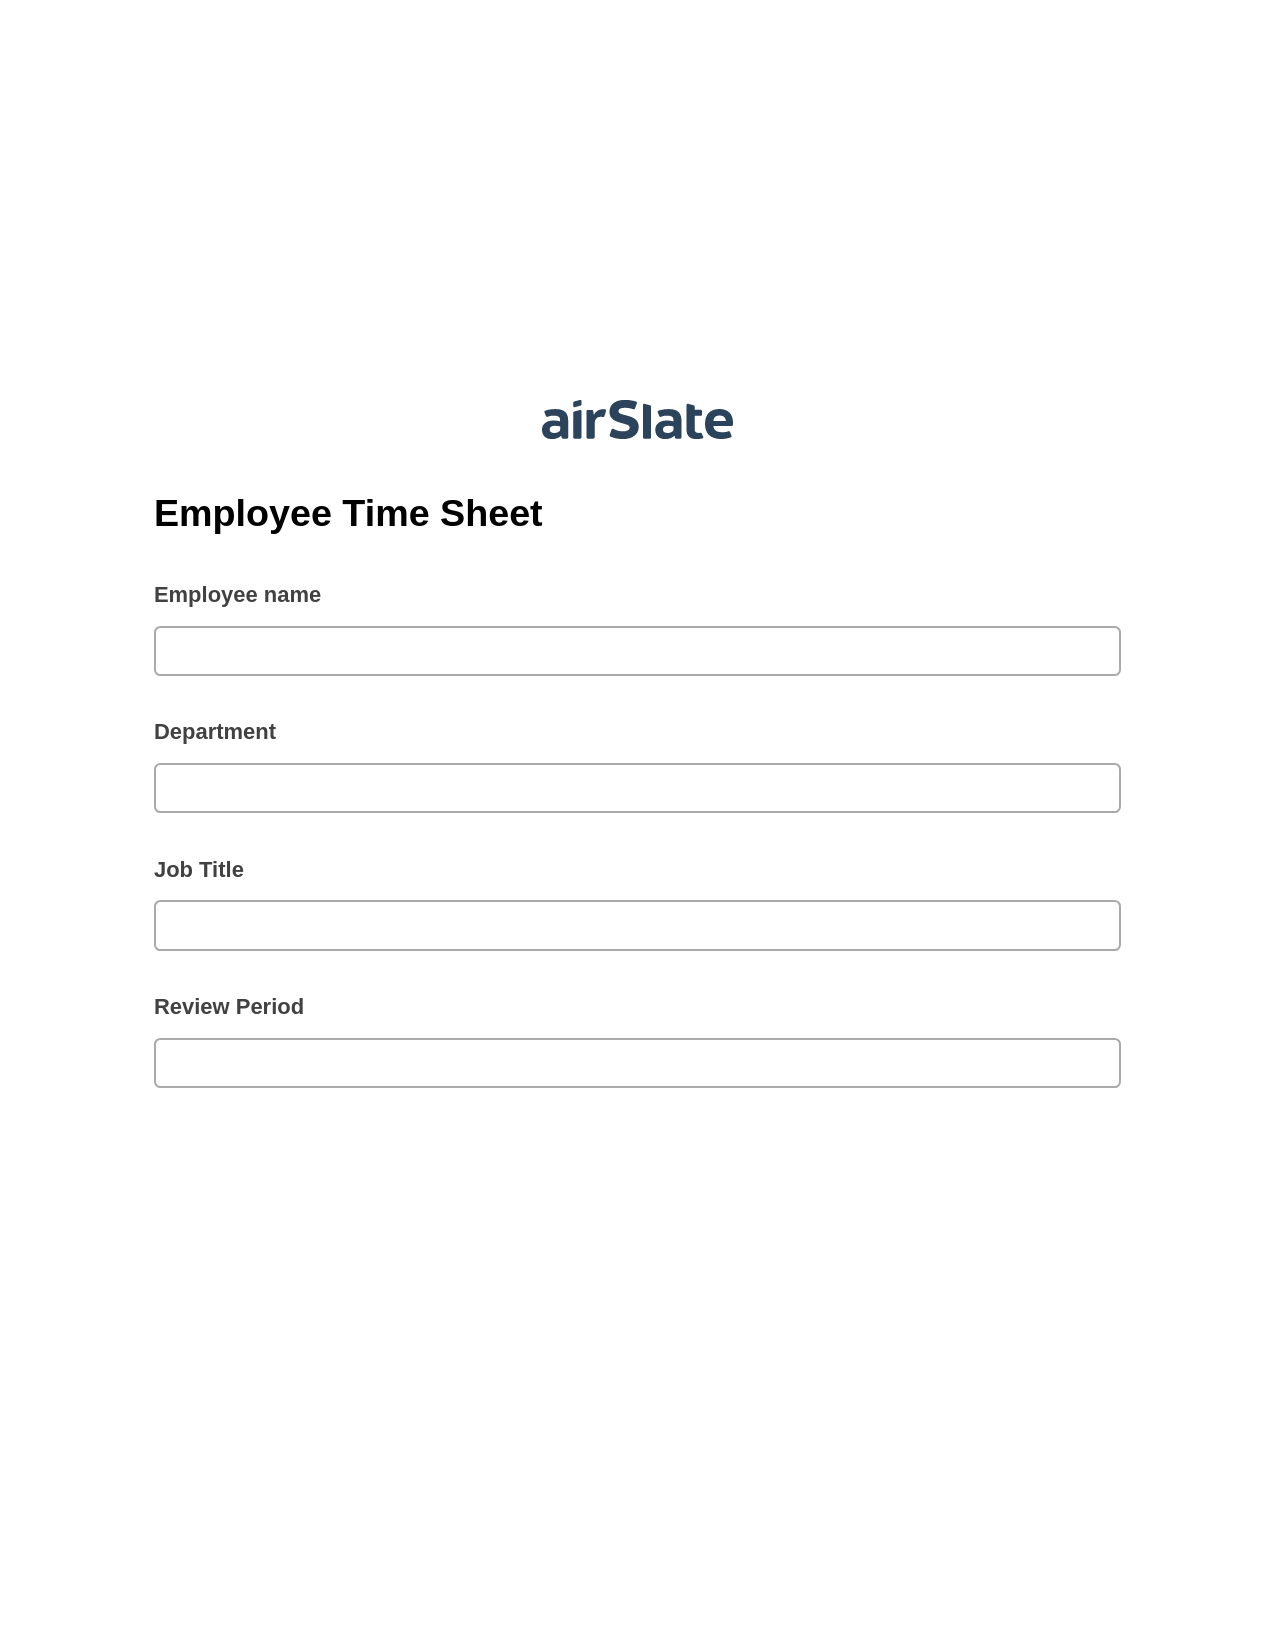 Employee Time Sheet Pre-fill from MySQL Bot, Update Audit Trail Bot, Archive to SharePoint Folder Bot